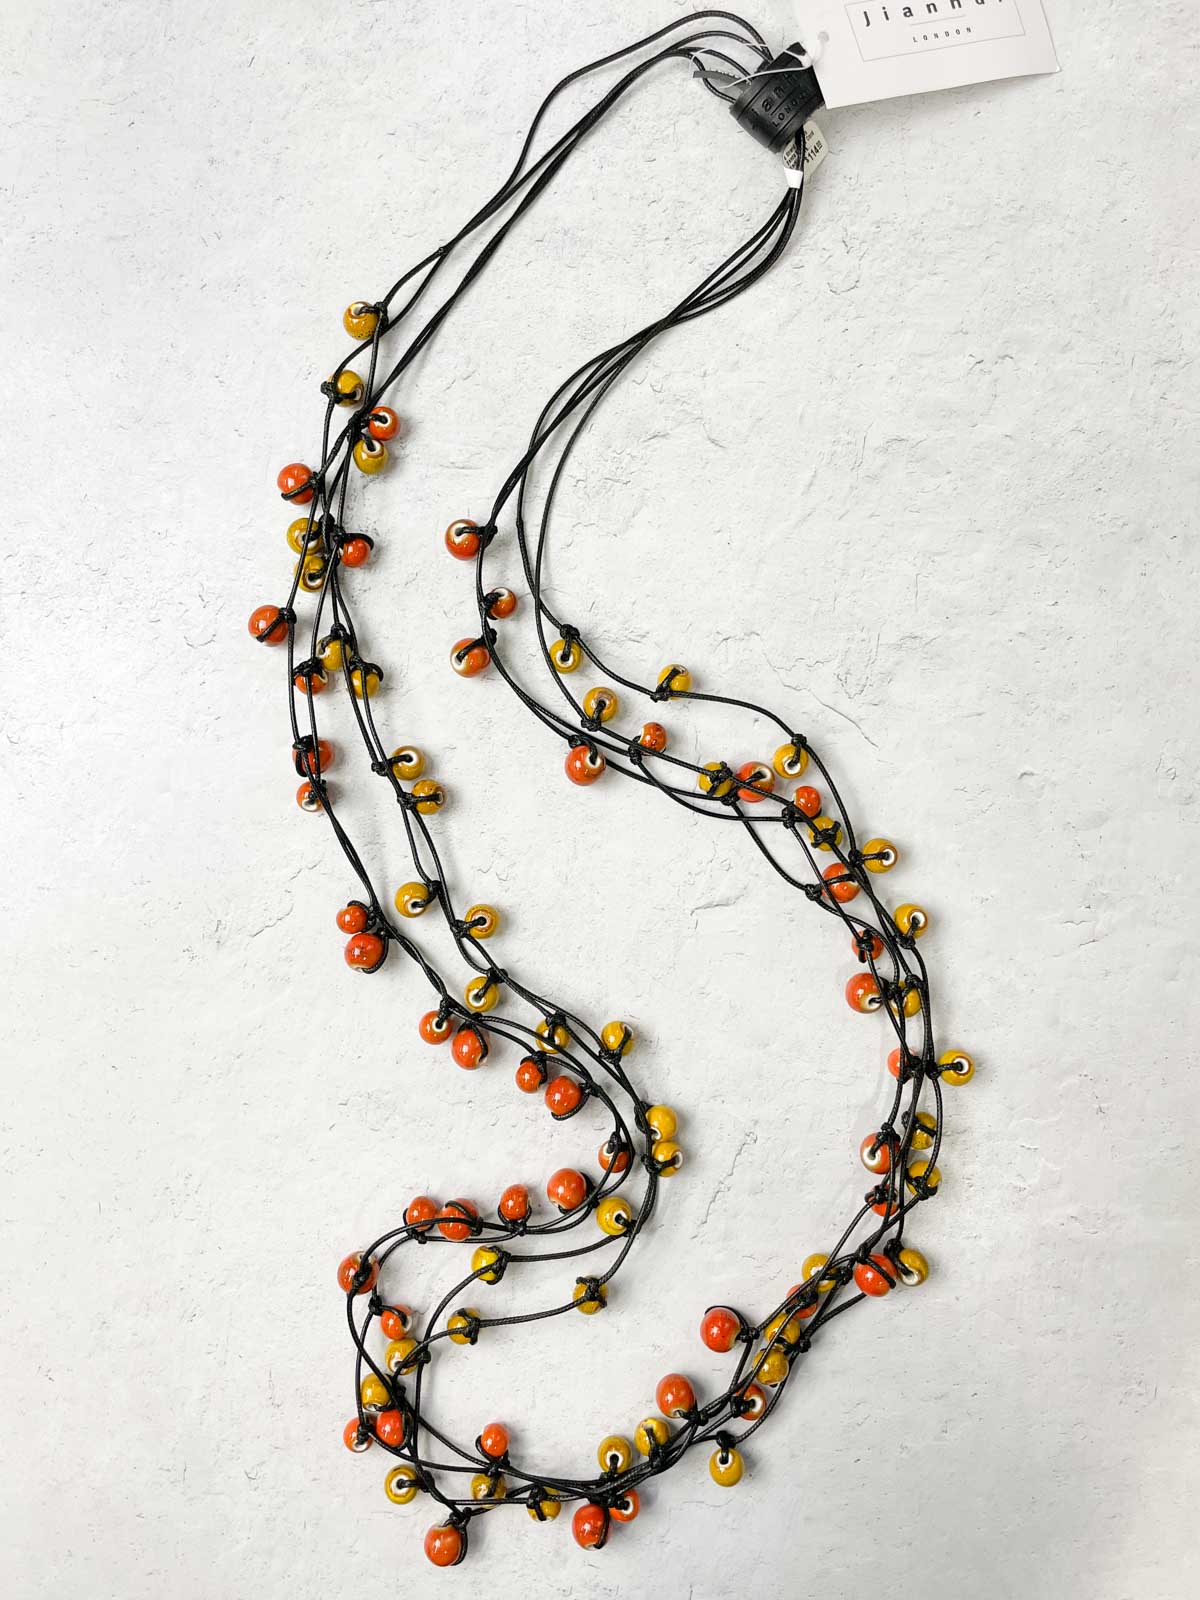 4 Strand Ceramic Beads Knotted Cord Necklace, Orange/Mustard